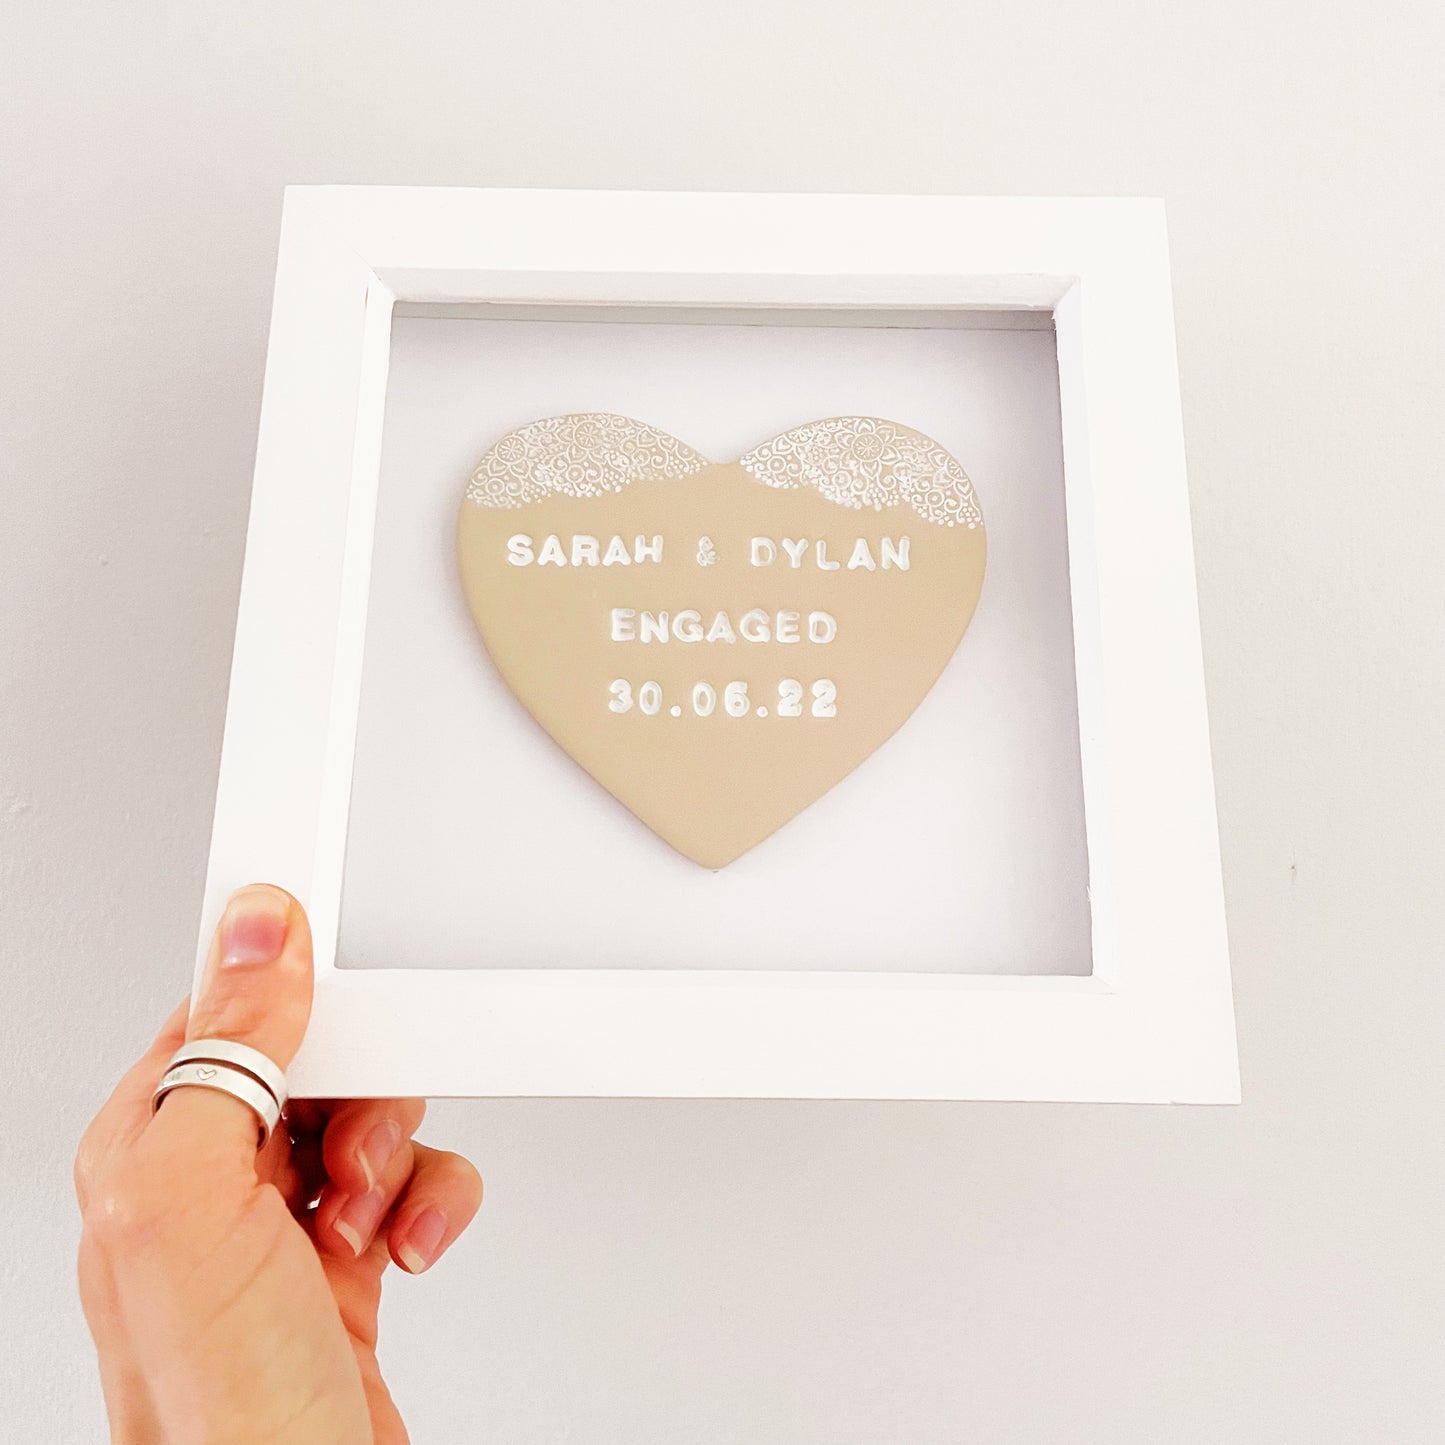 Personalised beige clay heart with a white lace edge at the top, in a white box frame, the heart is personalised with SARAH & DYLAN ENGAGED 30.06.22